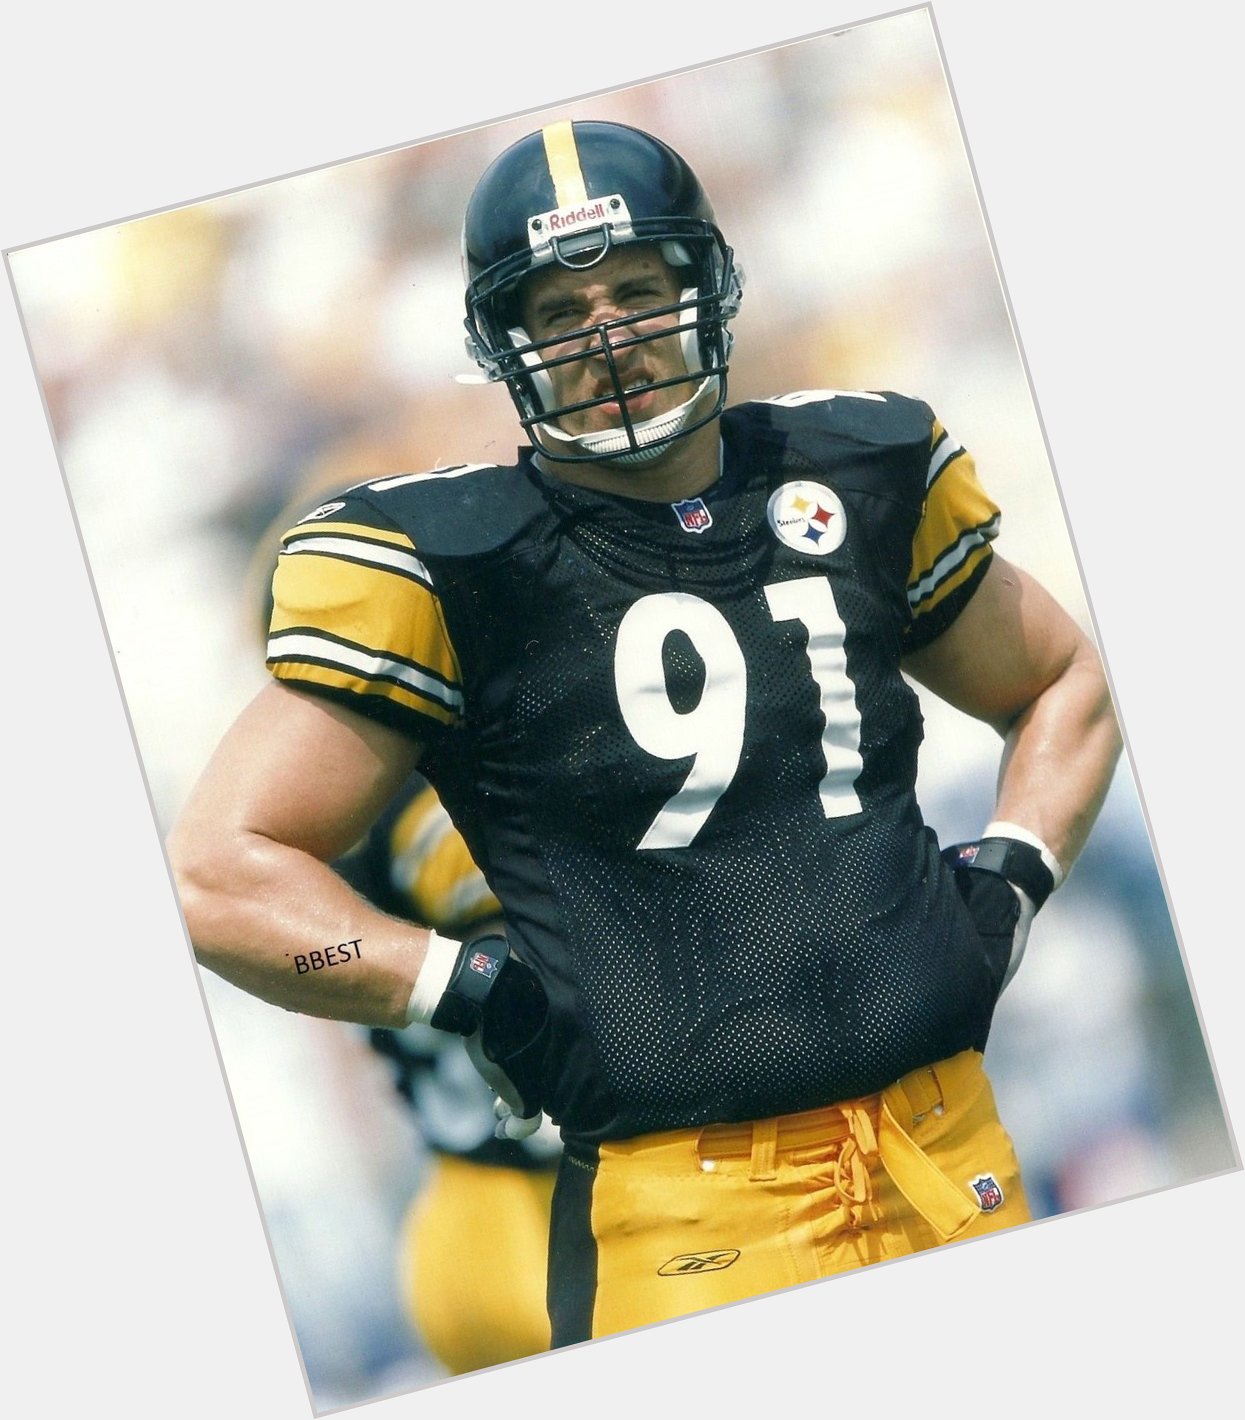 Happy Birthday to Aaron Smith! Luv those STEELERS! 